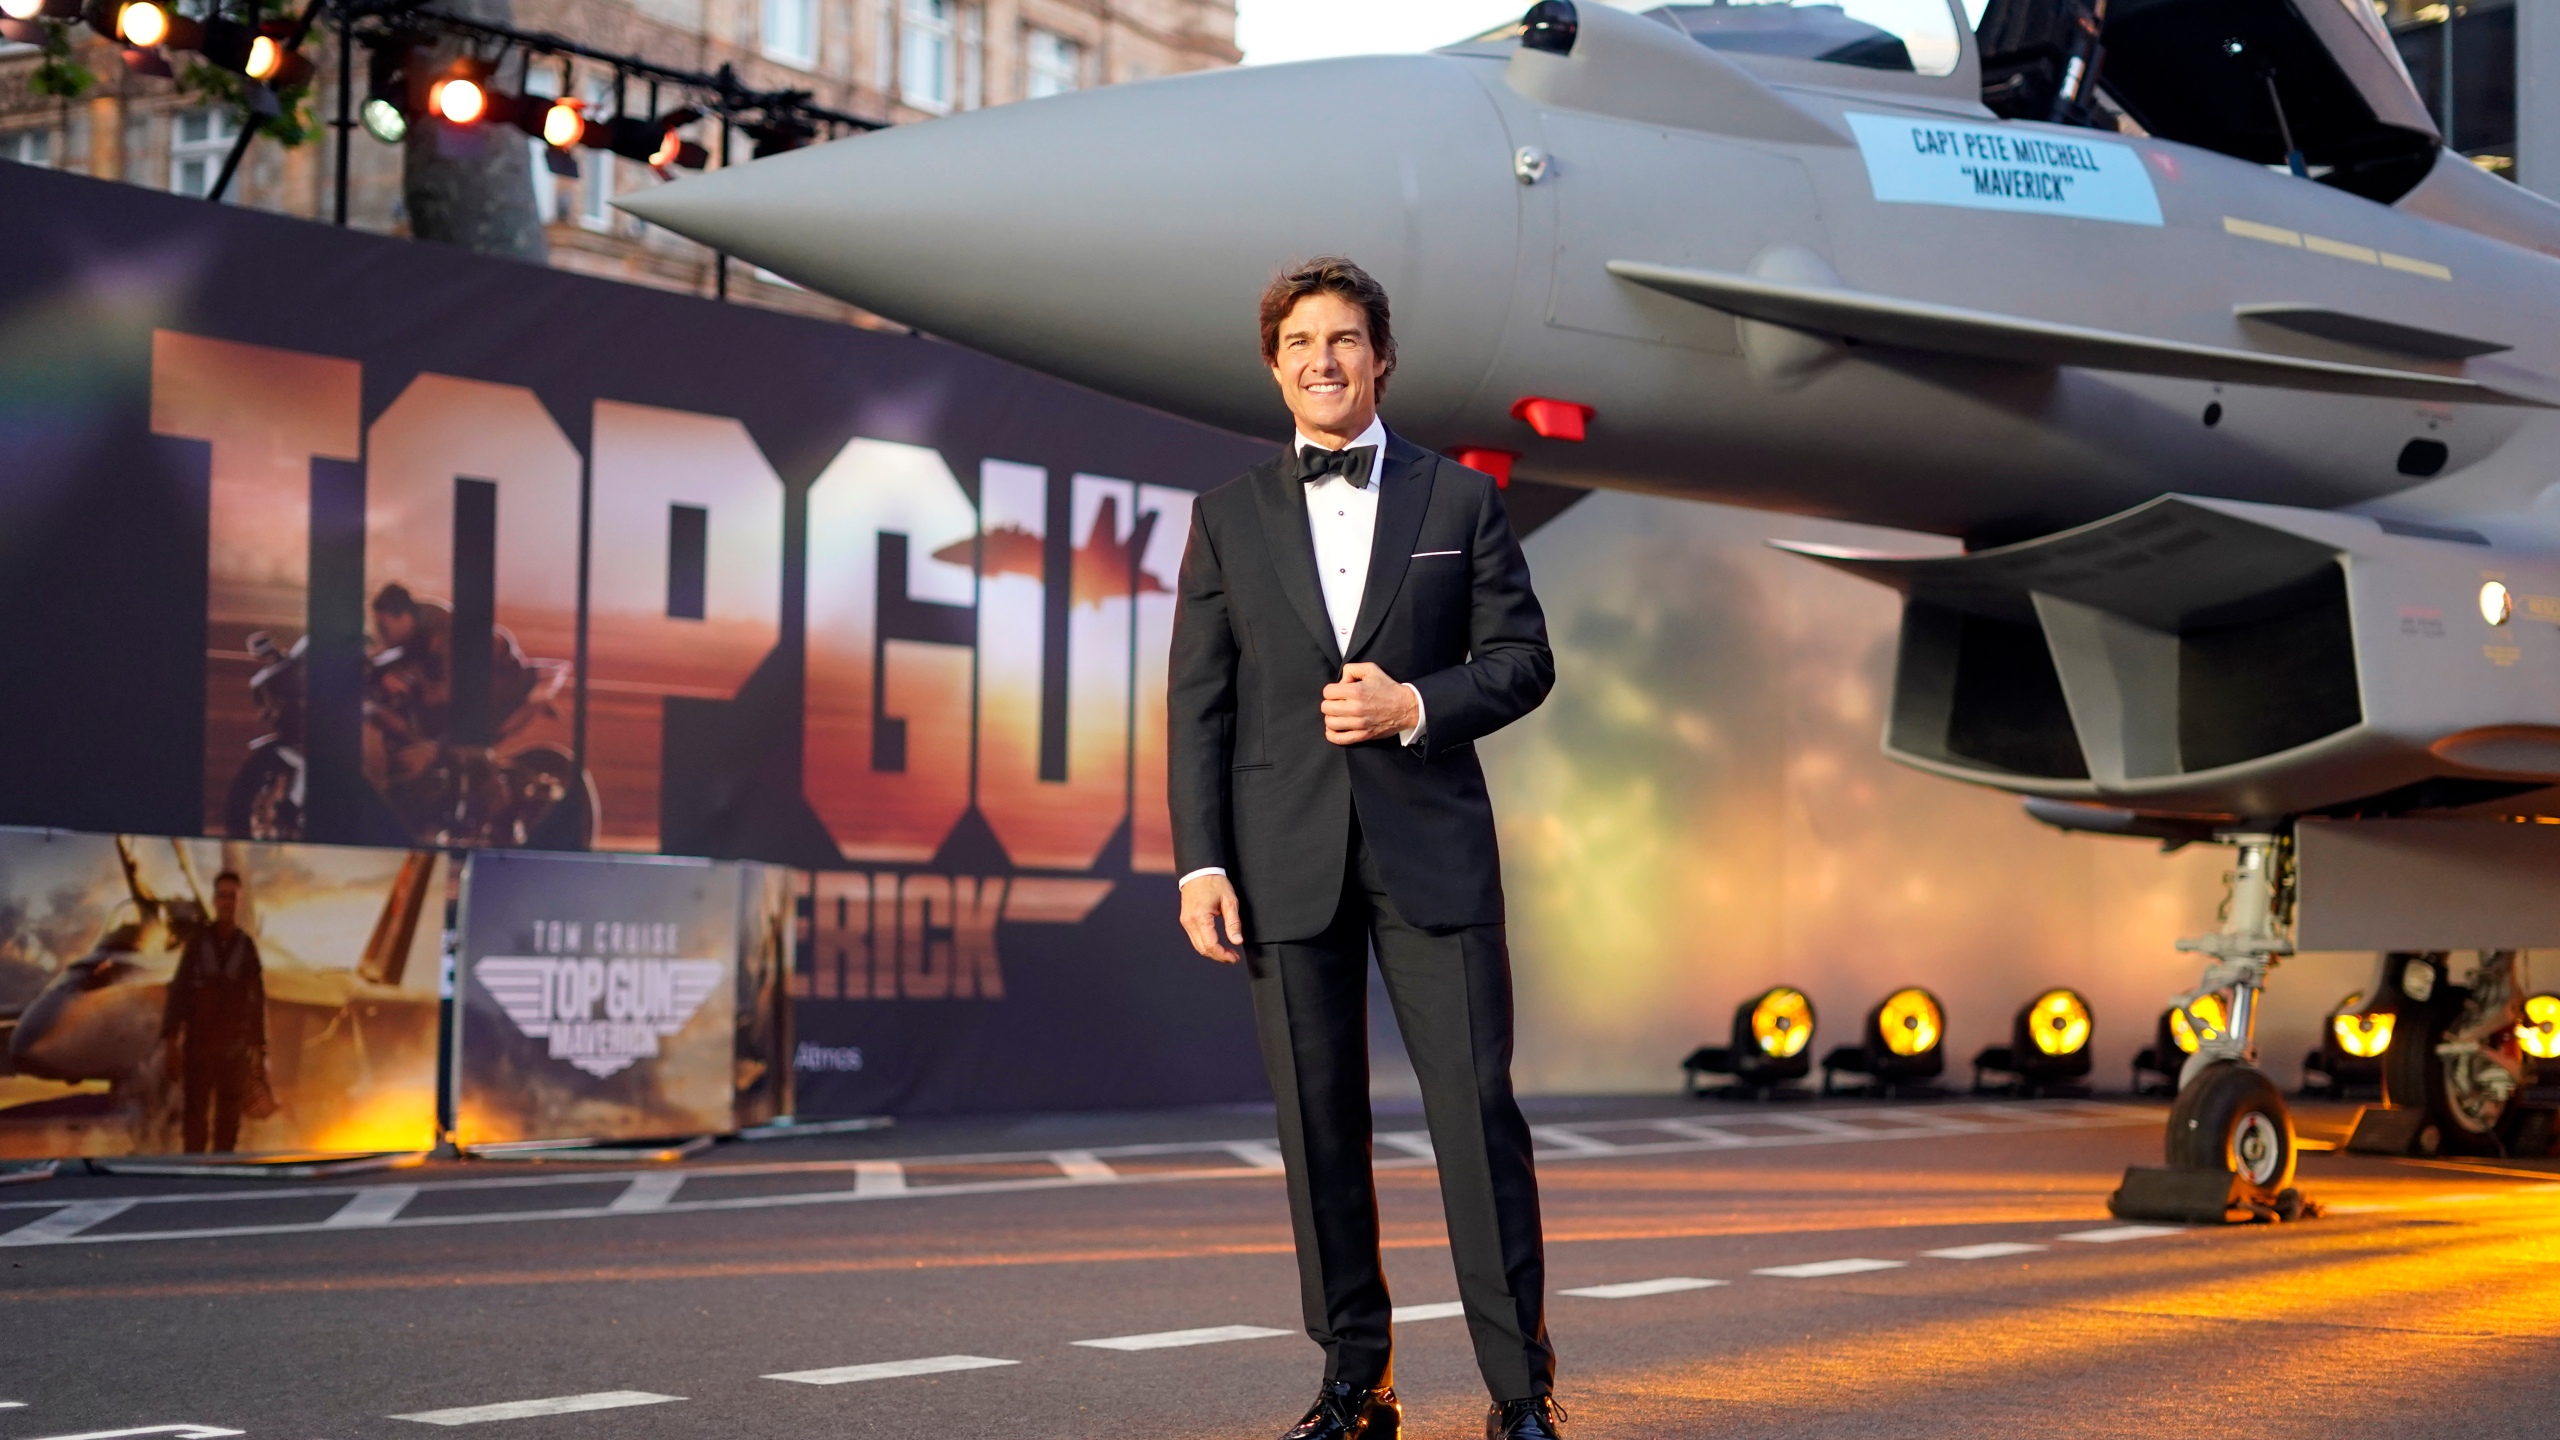 Top Gun' and Tom Cruise return to the danger zone